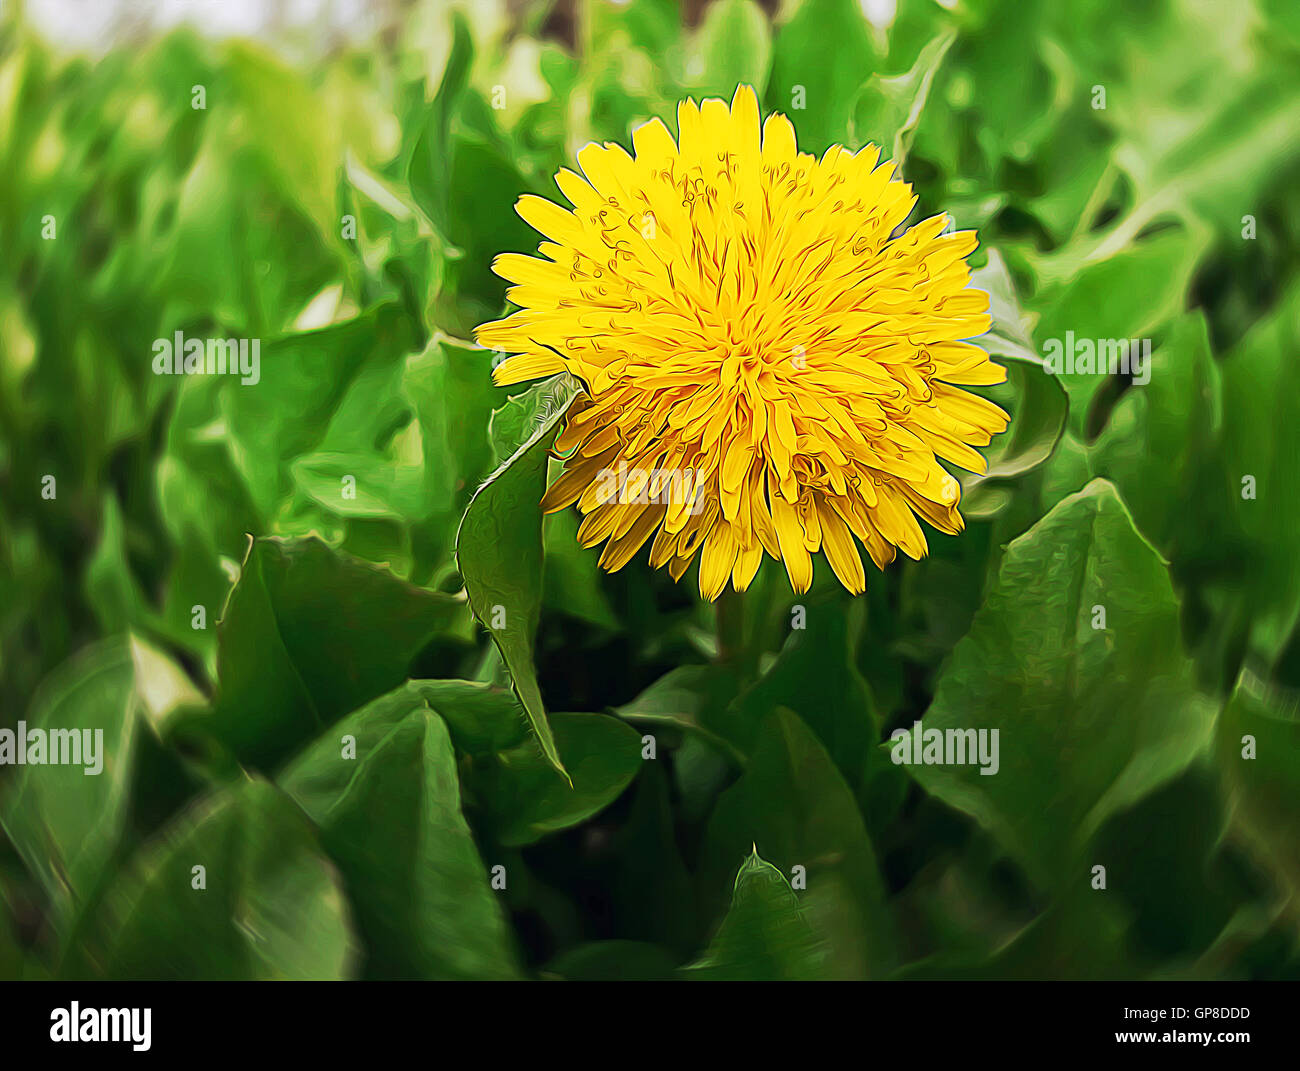 Dandelion flower close up on a green glade, meadow. Spring bright sunny day. The awakening of nature. Stock Photo